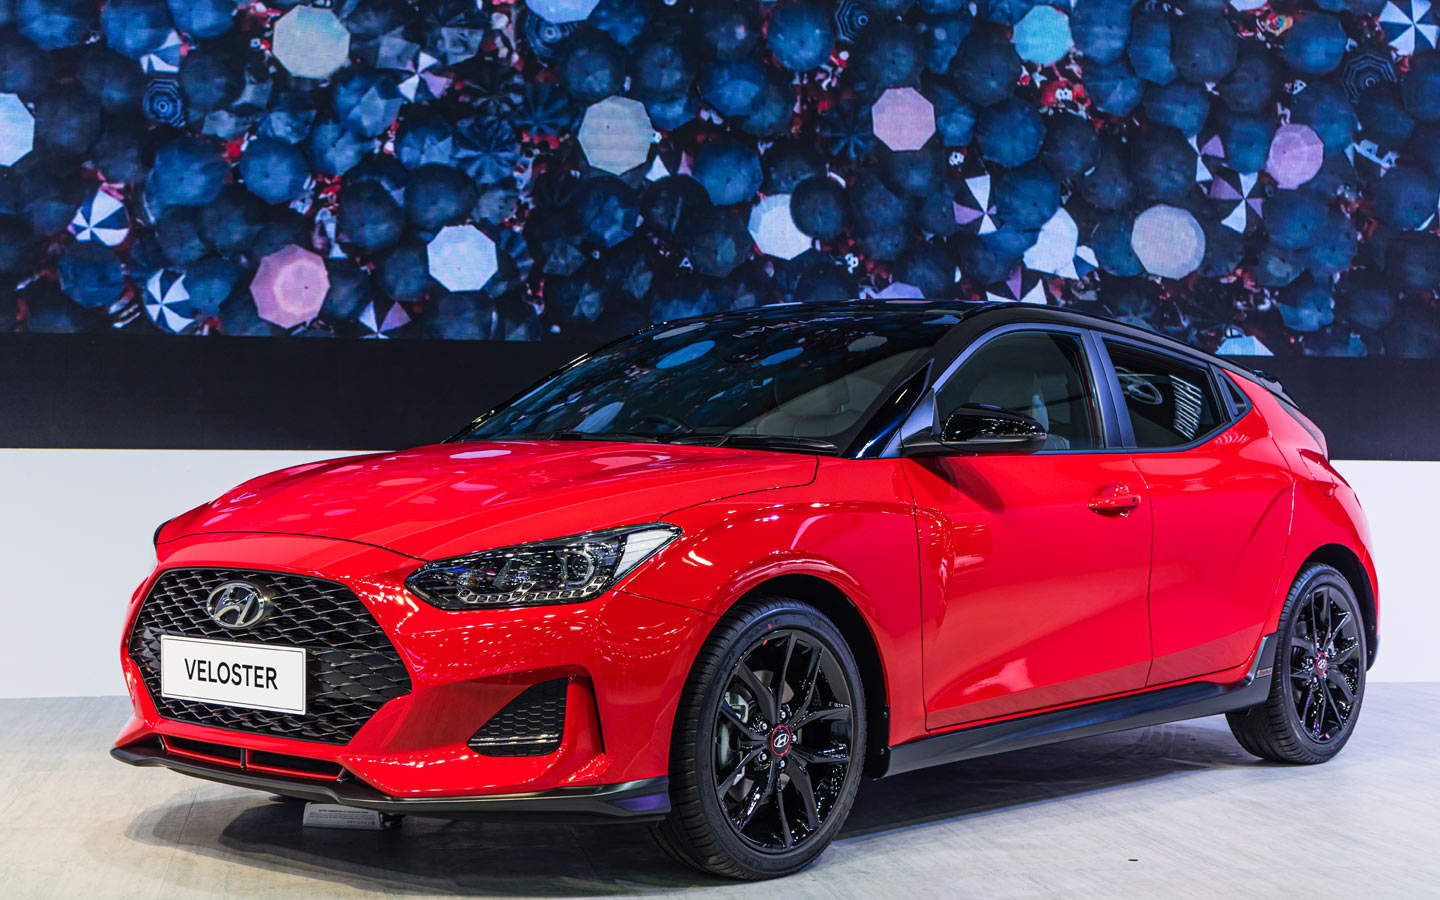 Hyundai Veloster Generations – the first iteration of the model had a distinctive design 